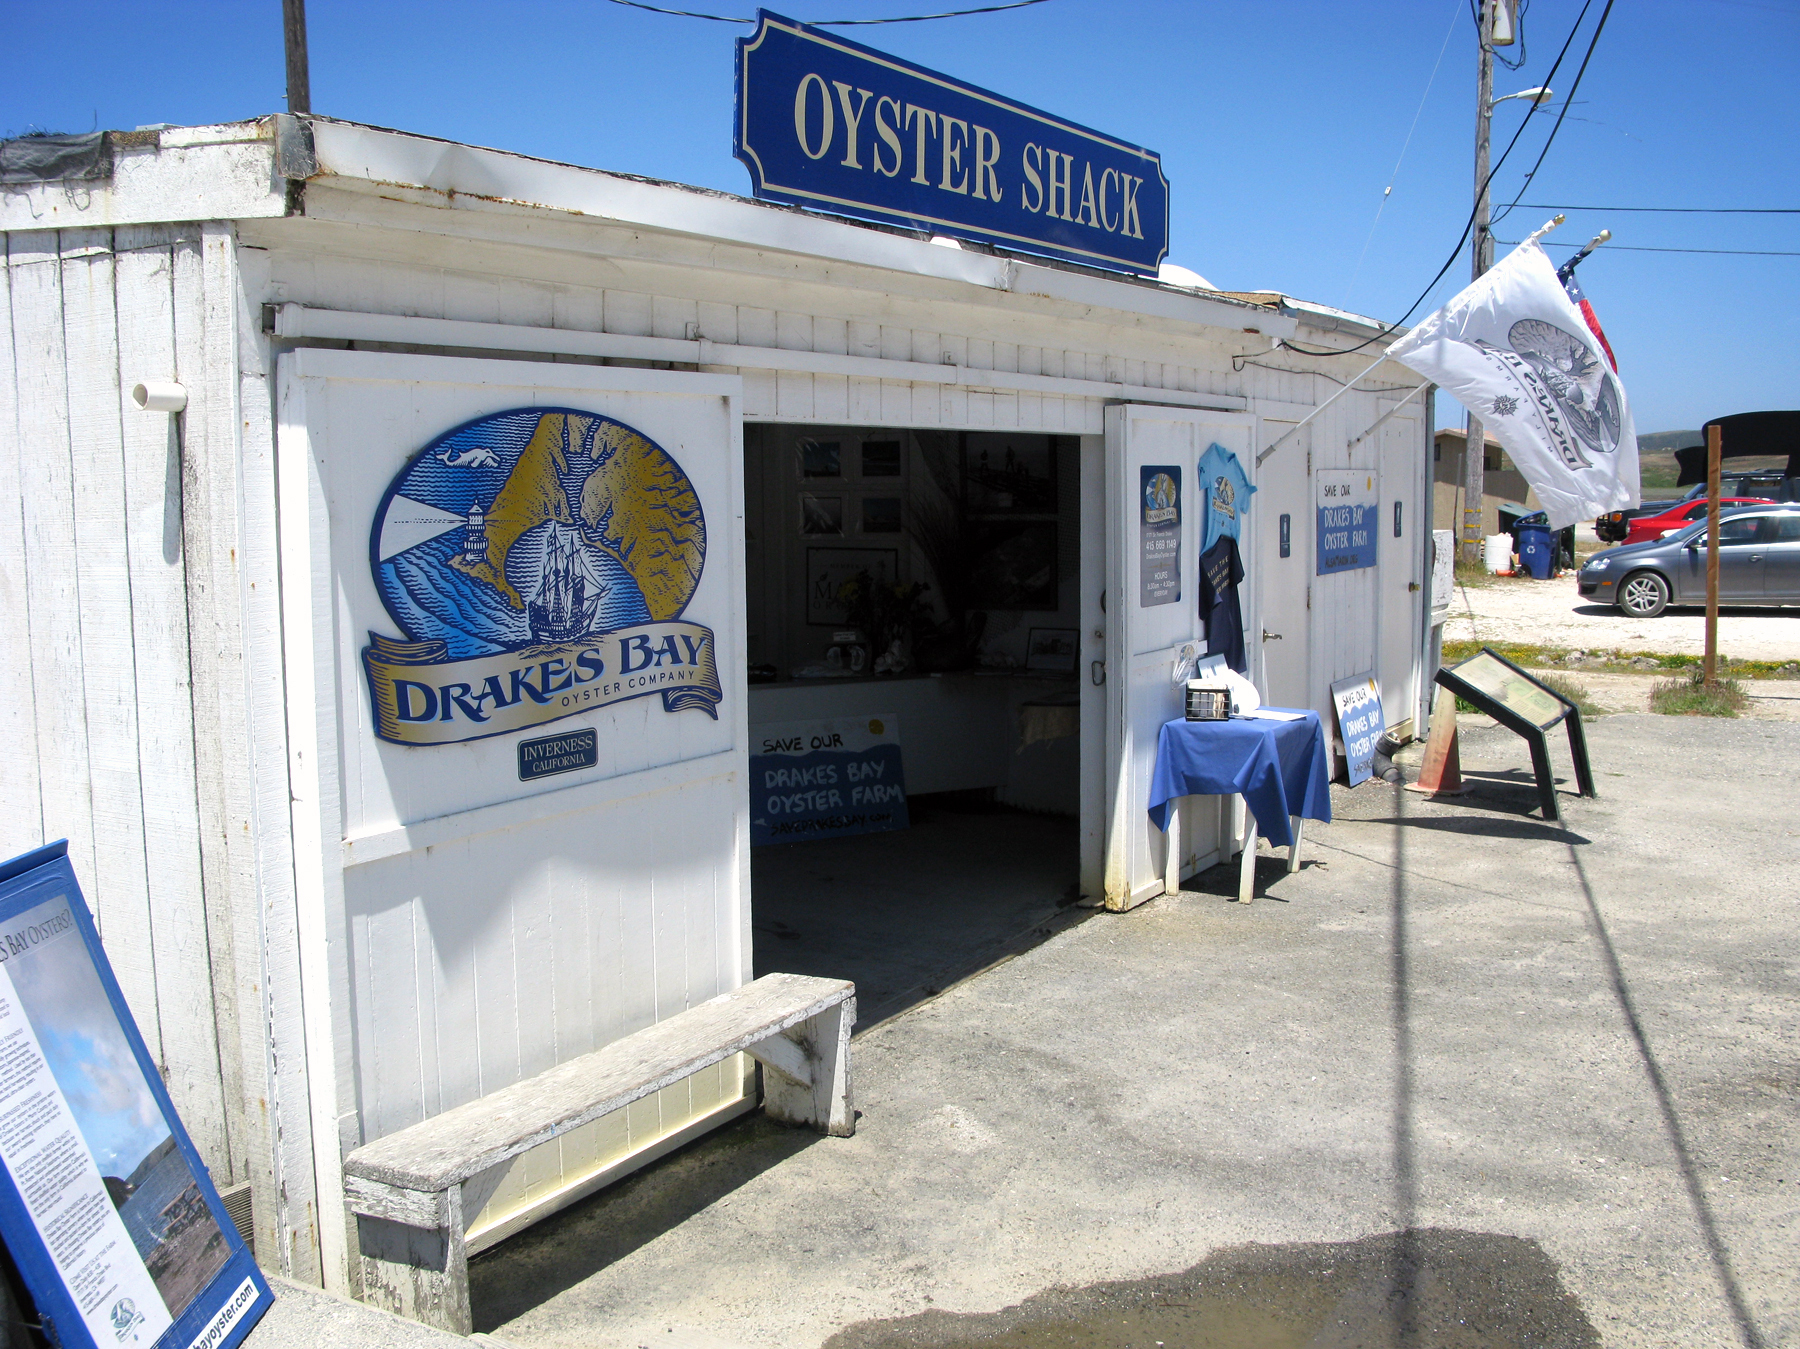 The Drakes Bay Oyster Farm caters to local residents and restaurants. But unless its lease is renewed, its days are numbered. Photo: Richard Gonzales/NPR